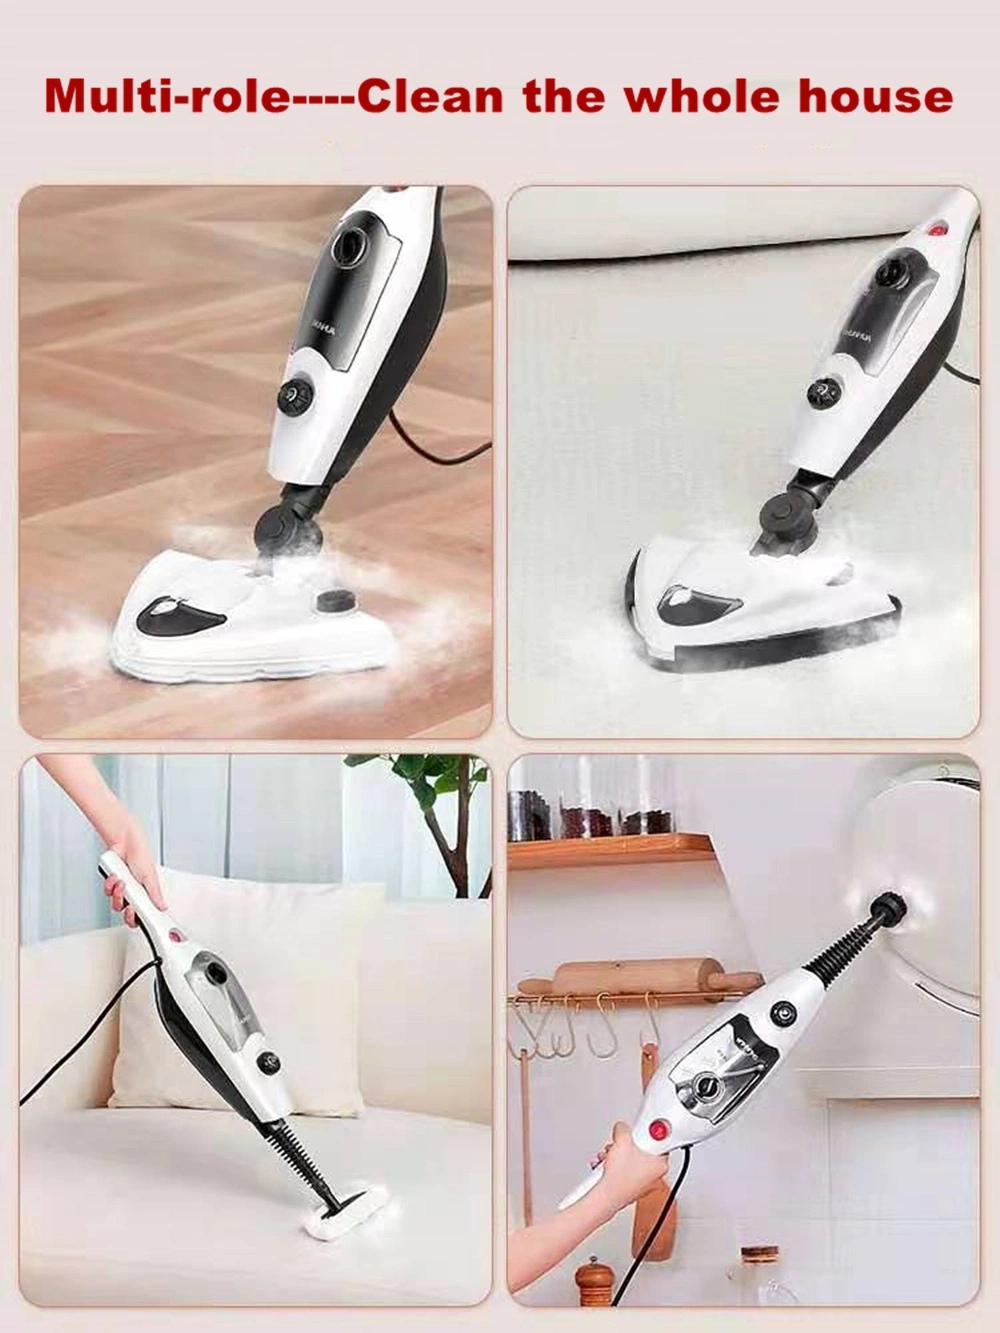 Versatile Steam Cleaning System for Hard Surfaces and Carpets